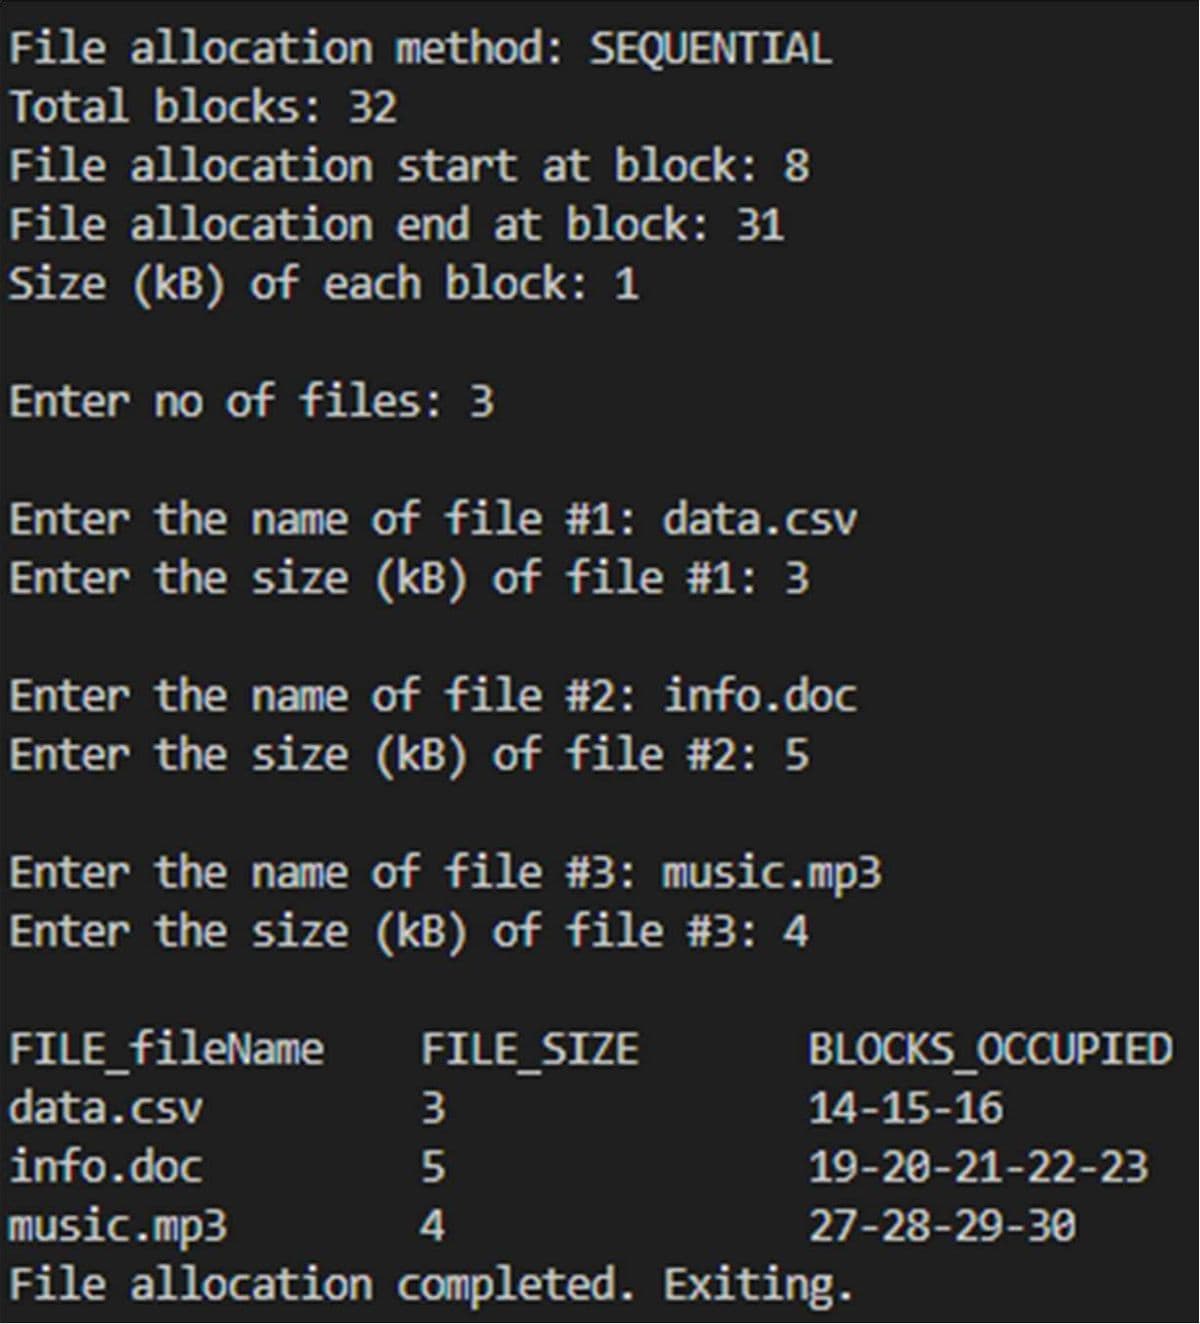 File allocation method: SEQUENTIAL
Total blocks: 32
File allocation start at block: 8
File allocation end at block: 31
Size (kB) of each block: 1
Enter no of files: 3
Enter the name of file #1: data.csv
Enter the size (kB) of file #1: 3
Enter the name of file #2: info.doc
Enter the size (kB) of file #2: 5
Enter the name of file #3: music.mp3
Enter the size (kB) of file #3: 4
FILE_fileName
data.csv
info.doc
music.mp3
File allocation completed. Exiting.
FILE_SIZE
BLOCKS_OCCUPIED
3
14-15-16
5
19-20-21-22-23
4
27-28-29-30
